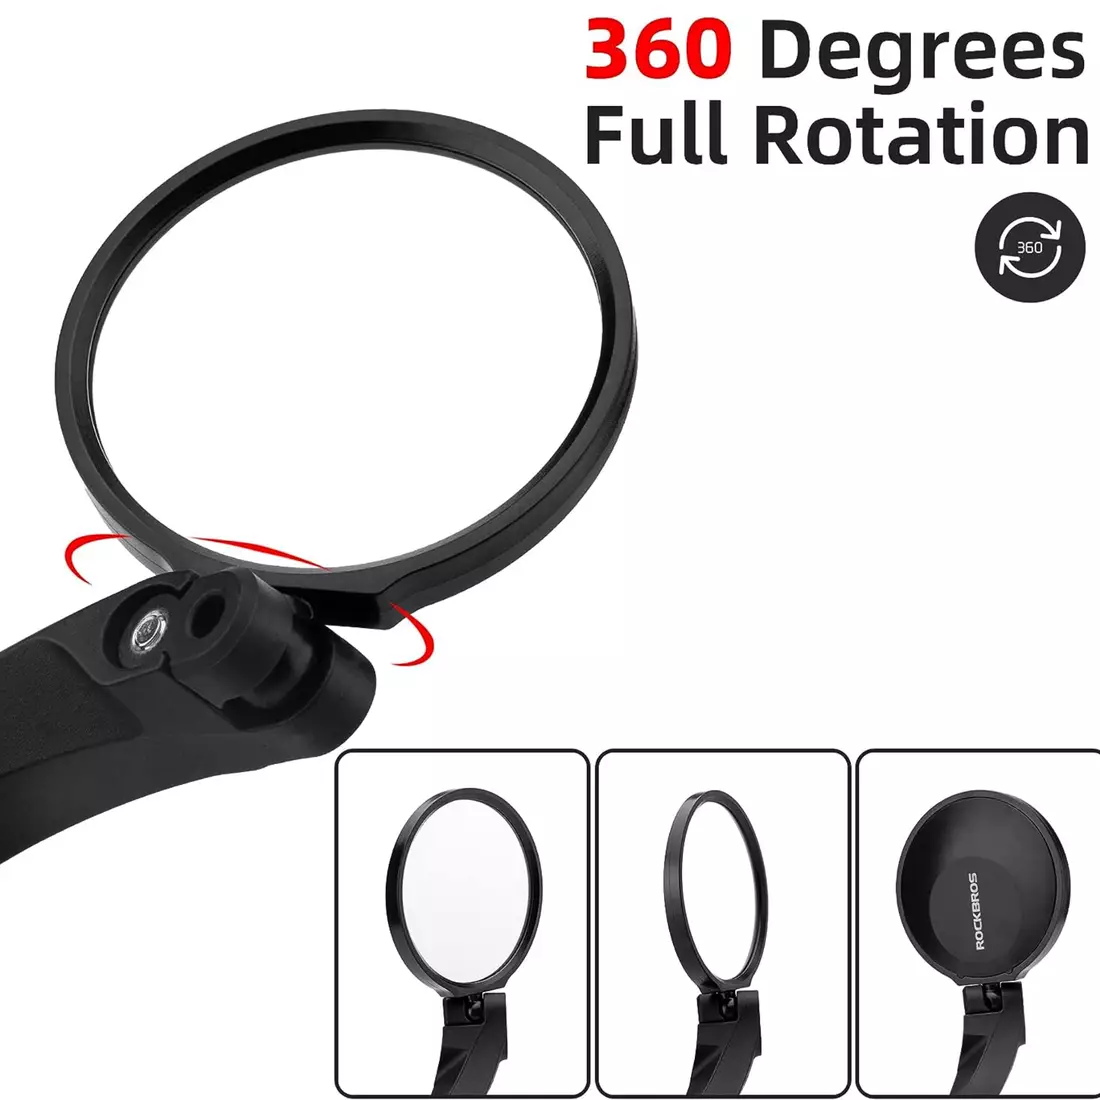 Rockbros bicycle mirror with a handlebar clamp, right, black 26210001004